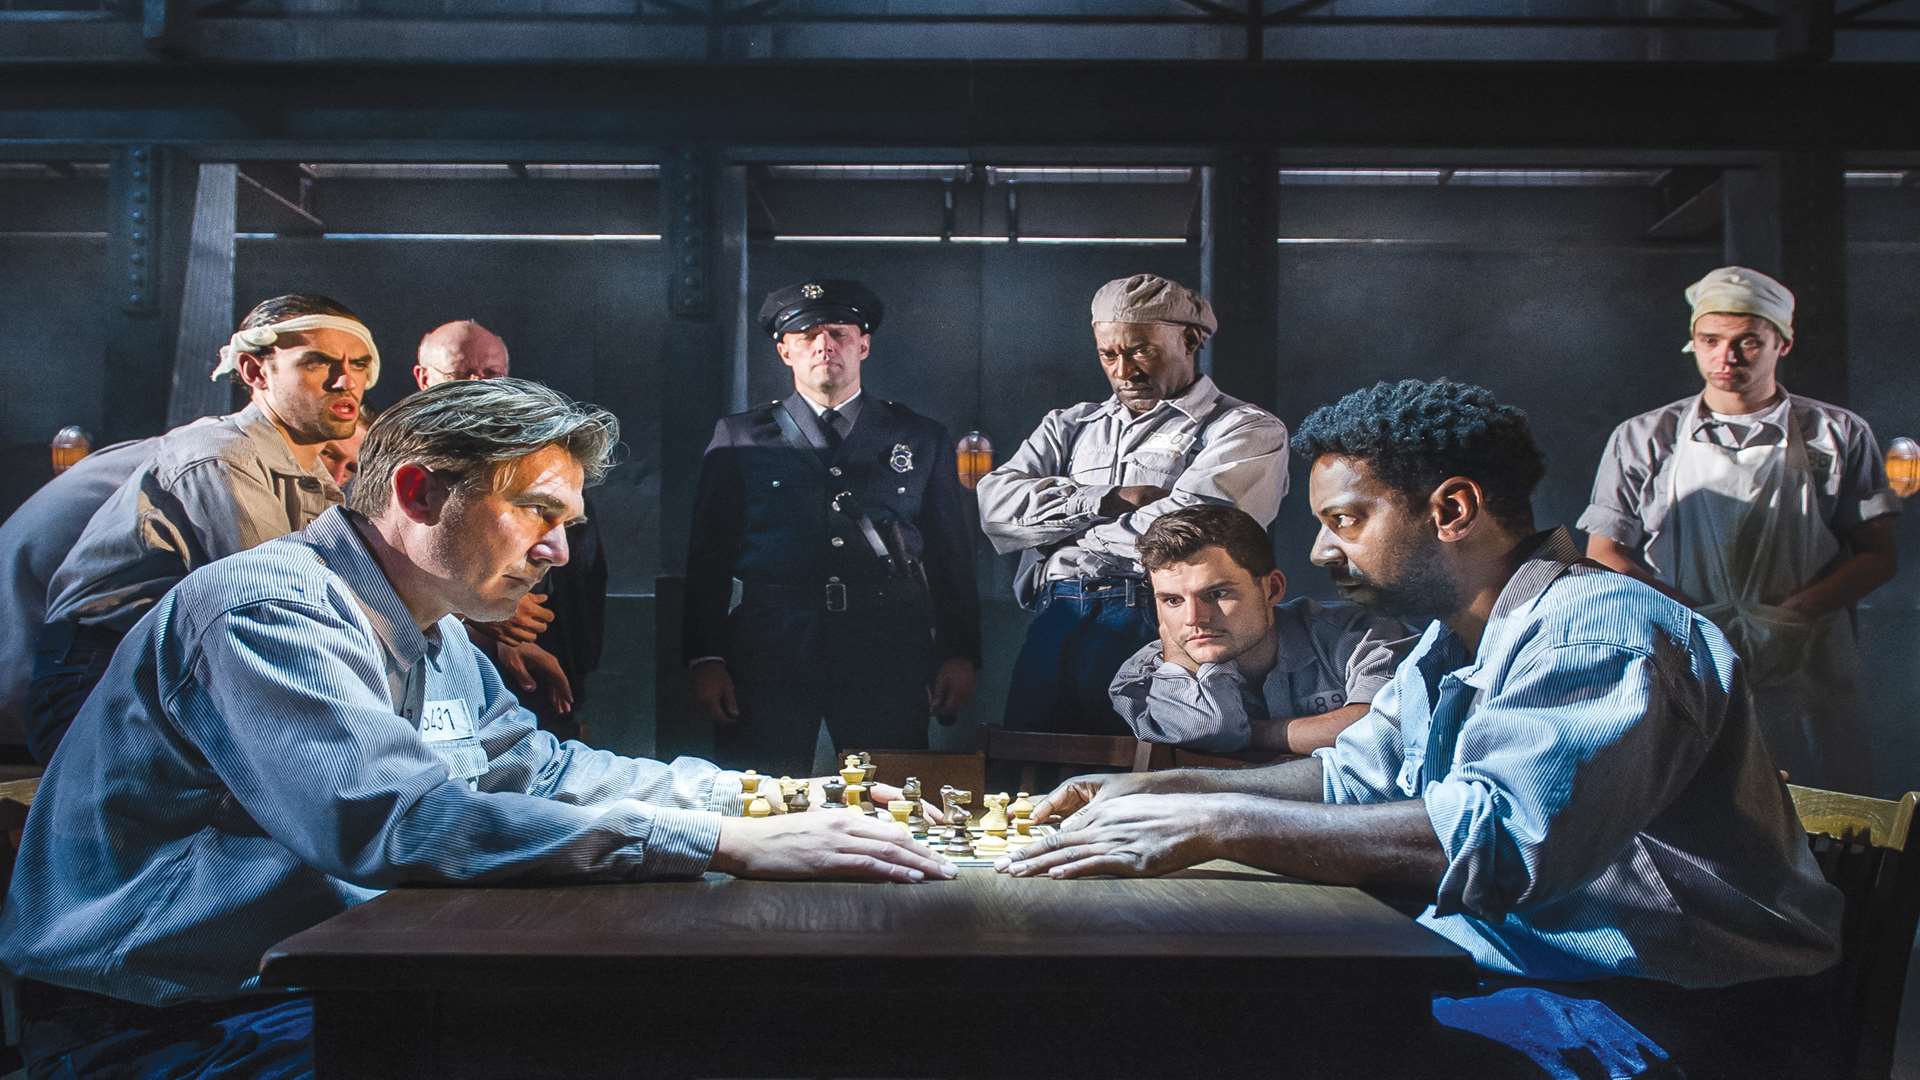 The stage version of Shawshank Redemption comes to the Marlowe Theatre